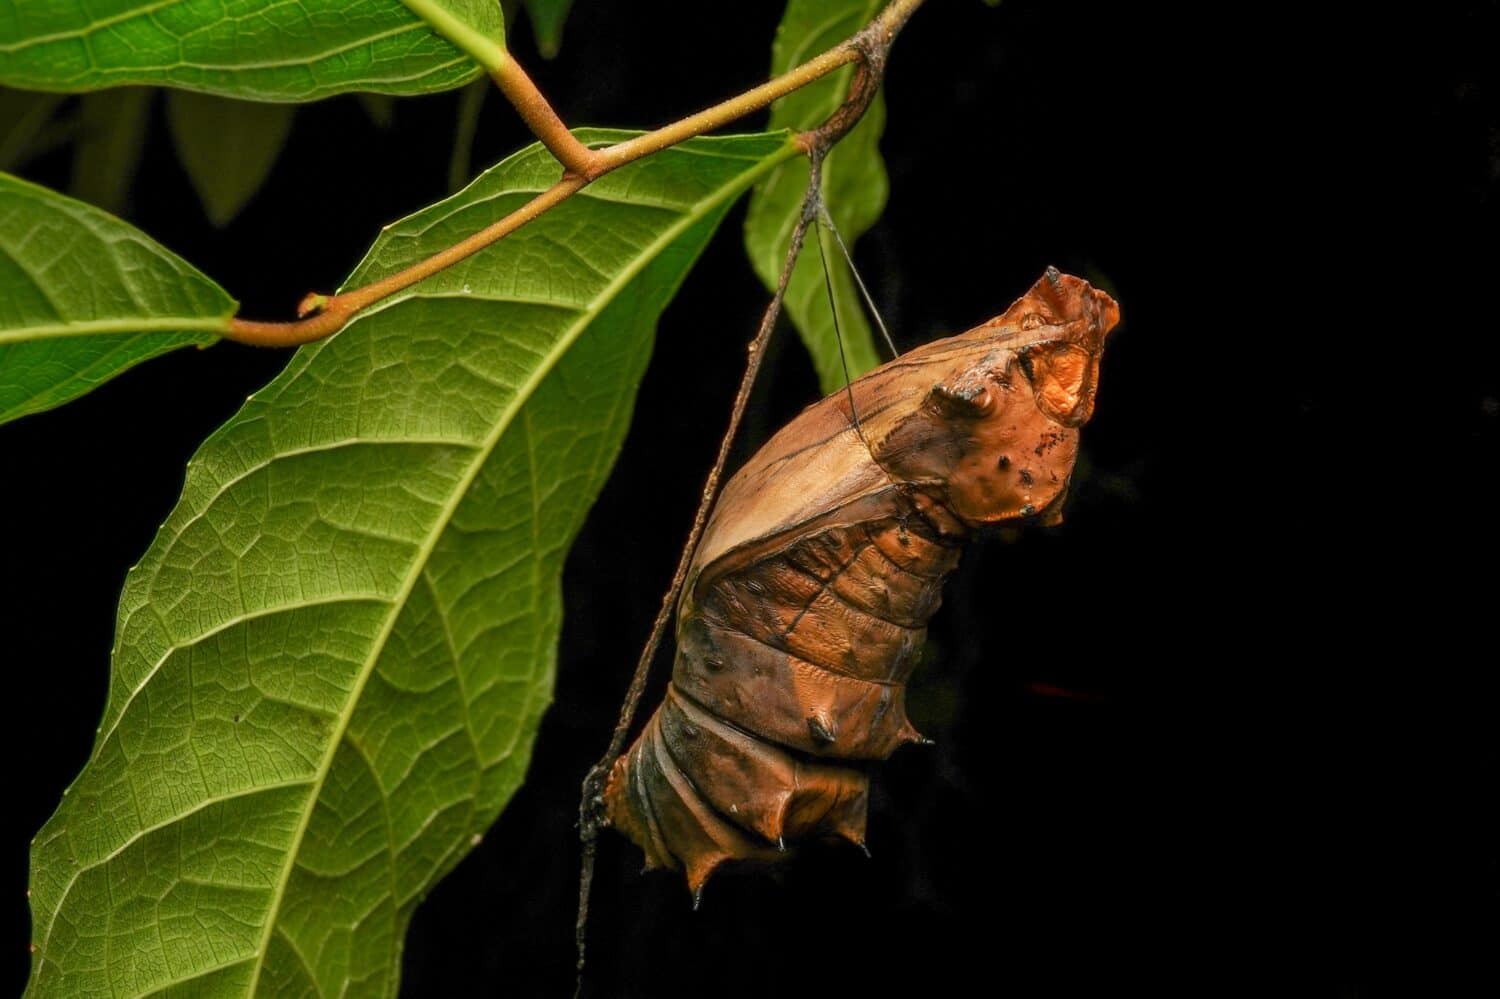 Cairns Birdwing butterfly cocoon (Ornithoptera euphorion)